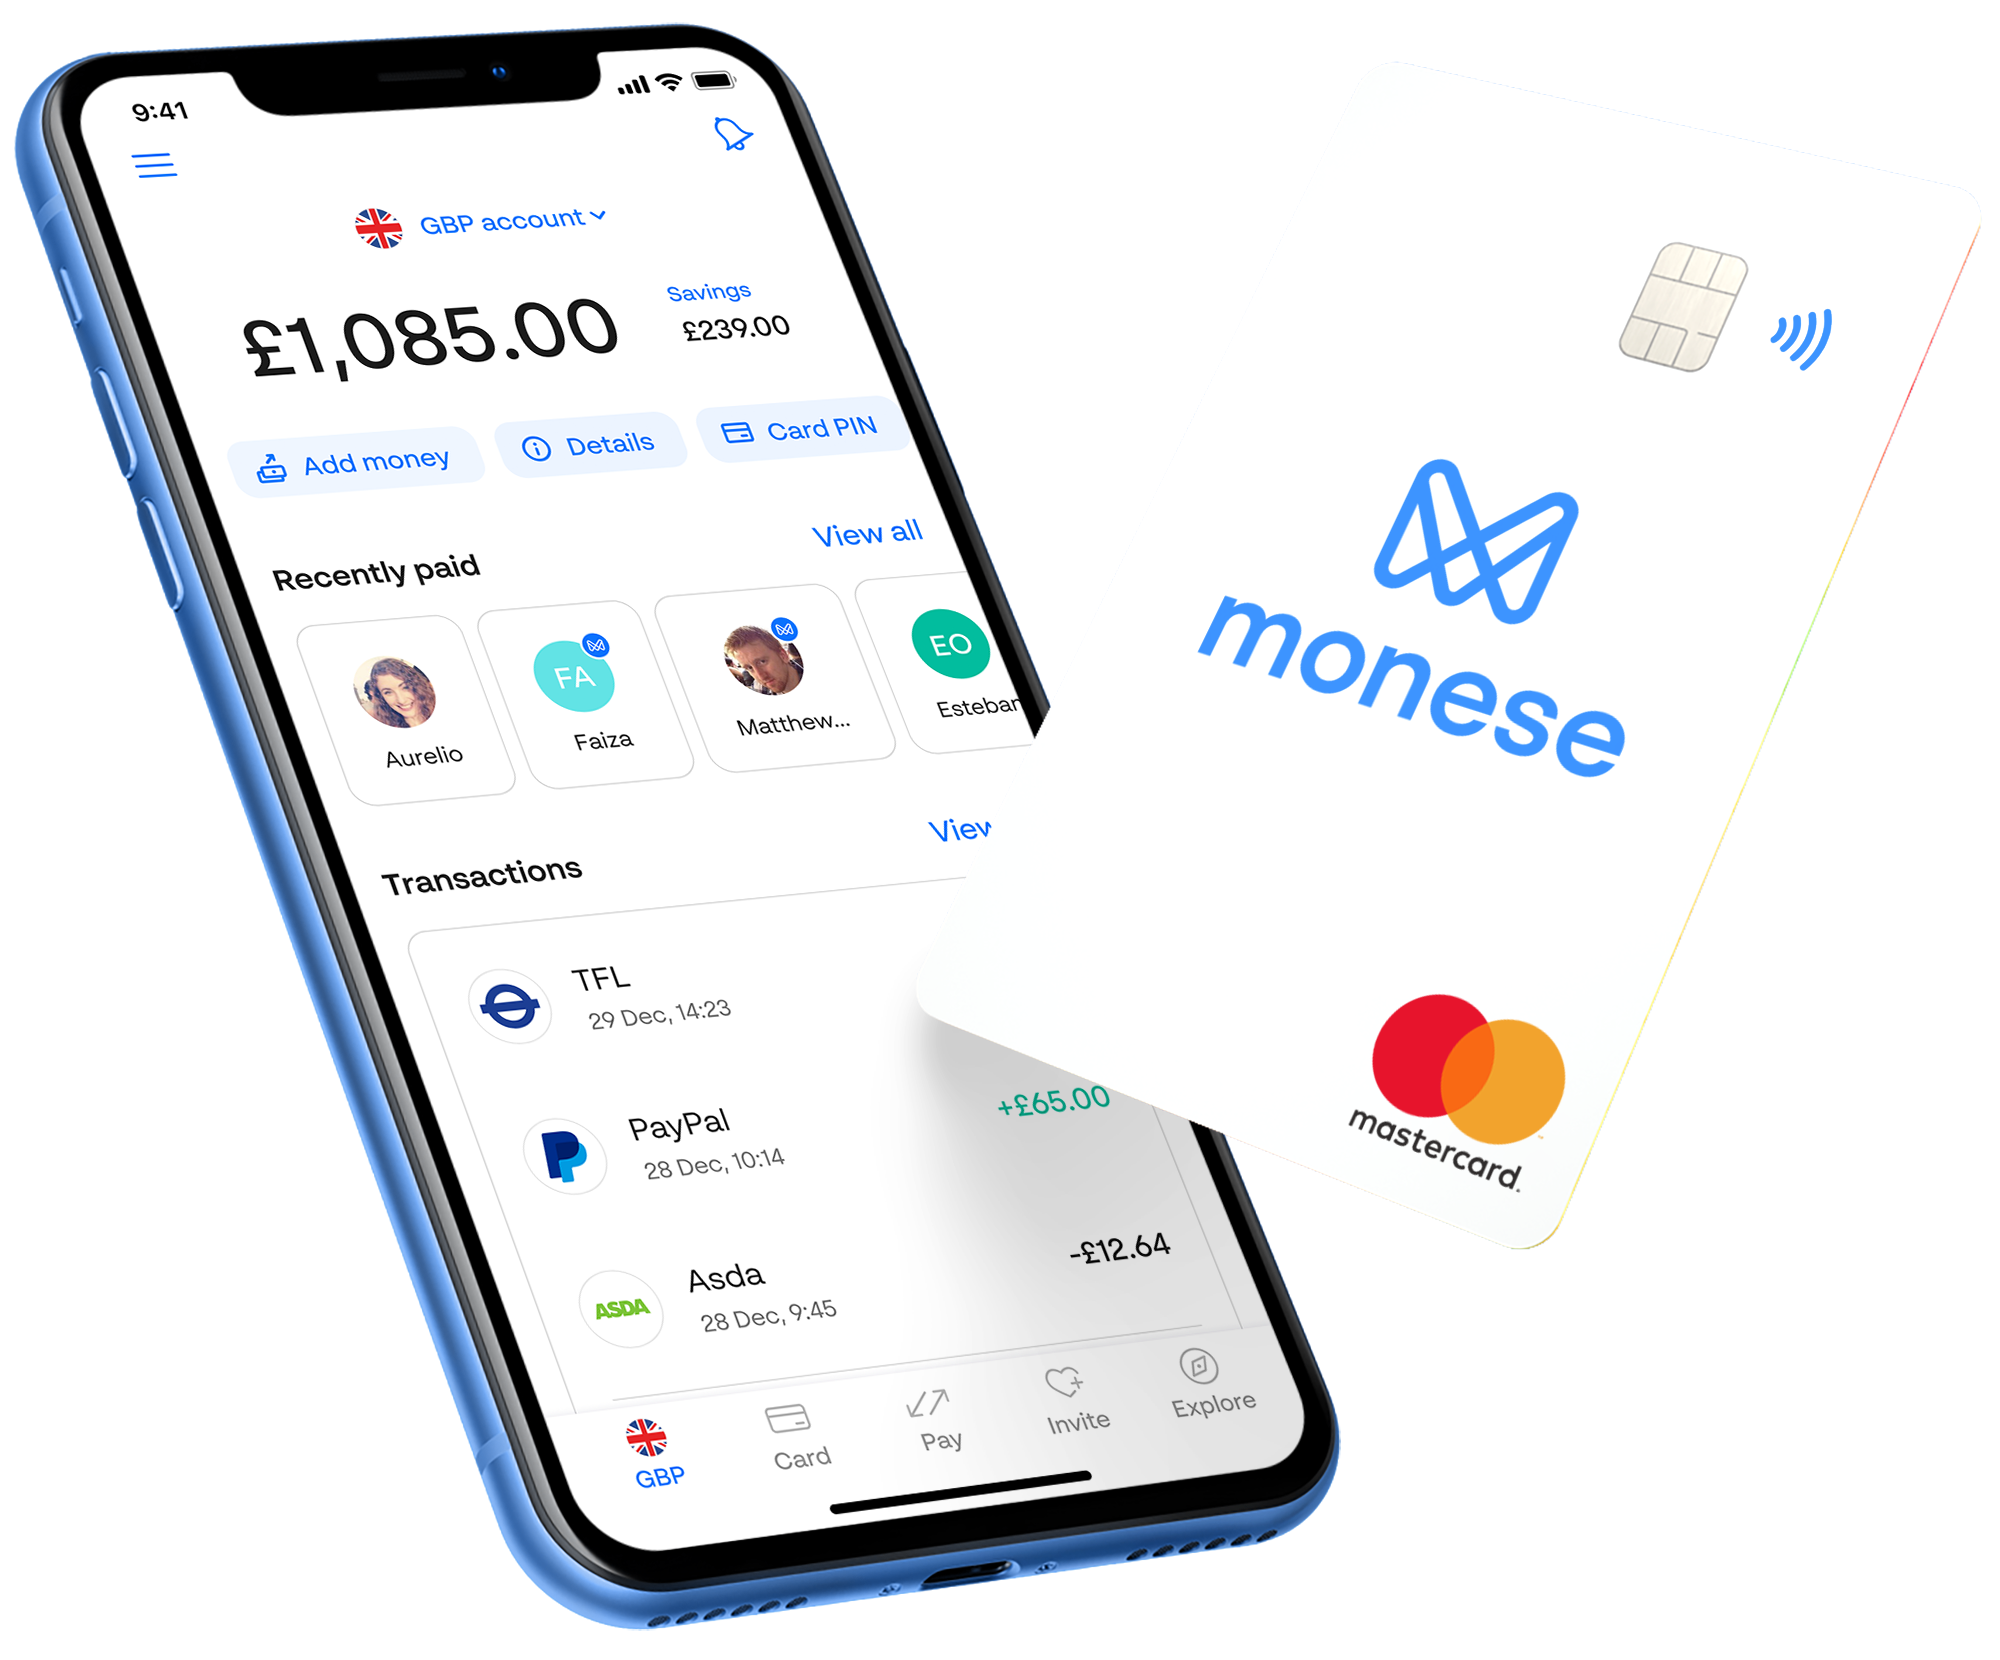 Monese: Open & Manage Your Mobile Money Account Online Today